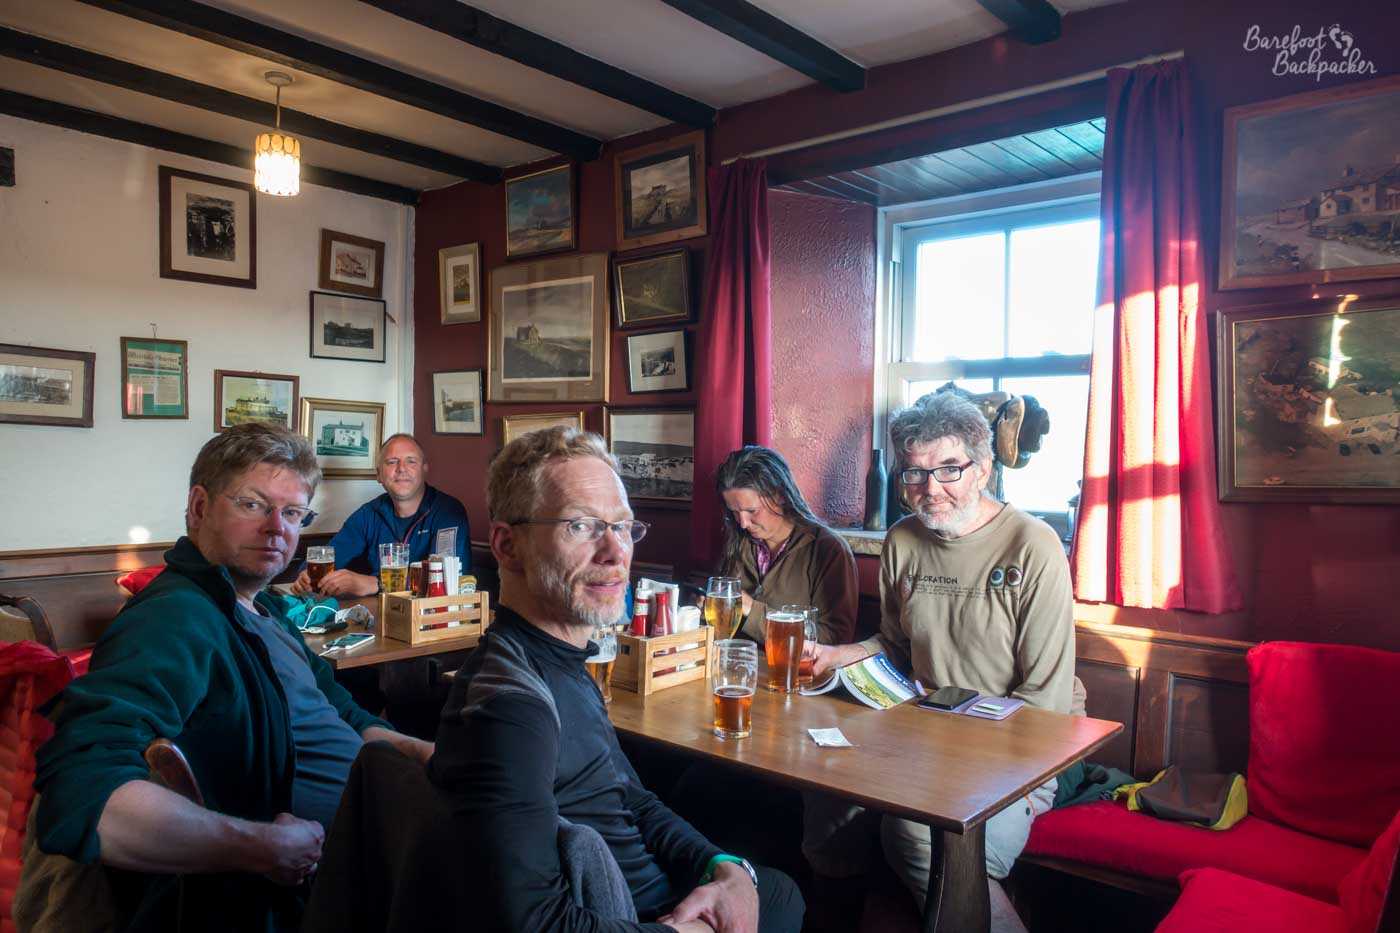 Five people sat around two tables in the pub are facing the camera – well four of them are, one is playing on her phone. The pub walls are covered with old pictures of days gone by. They all have drinks, and there's condiments on the table suggesting food will soon arrive.